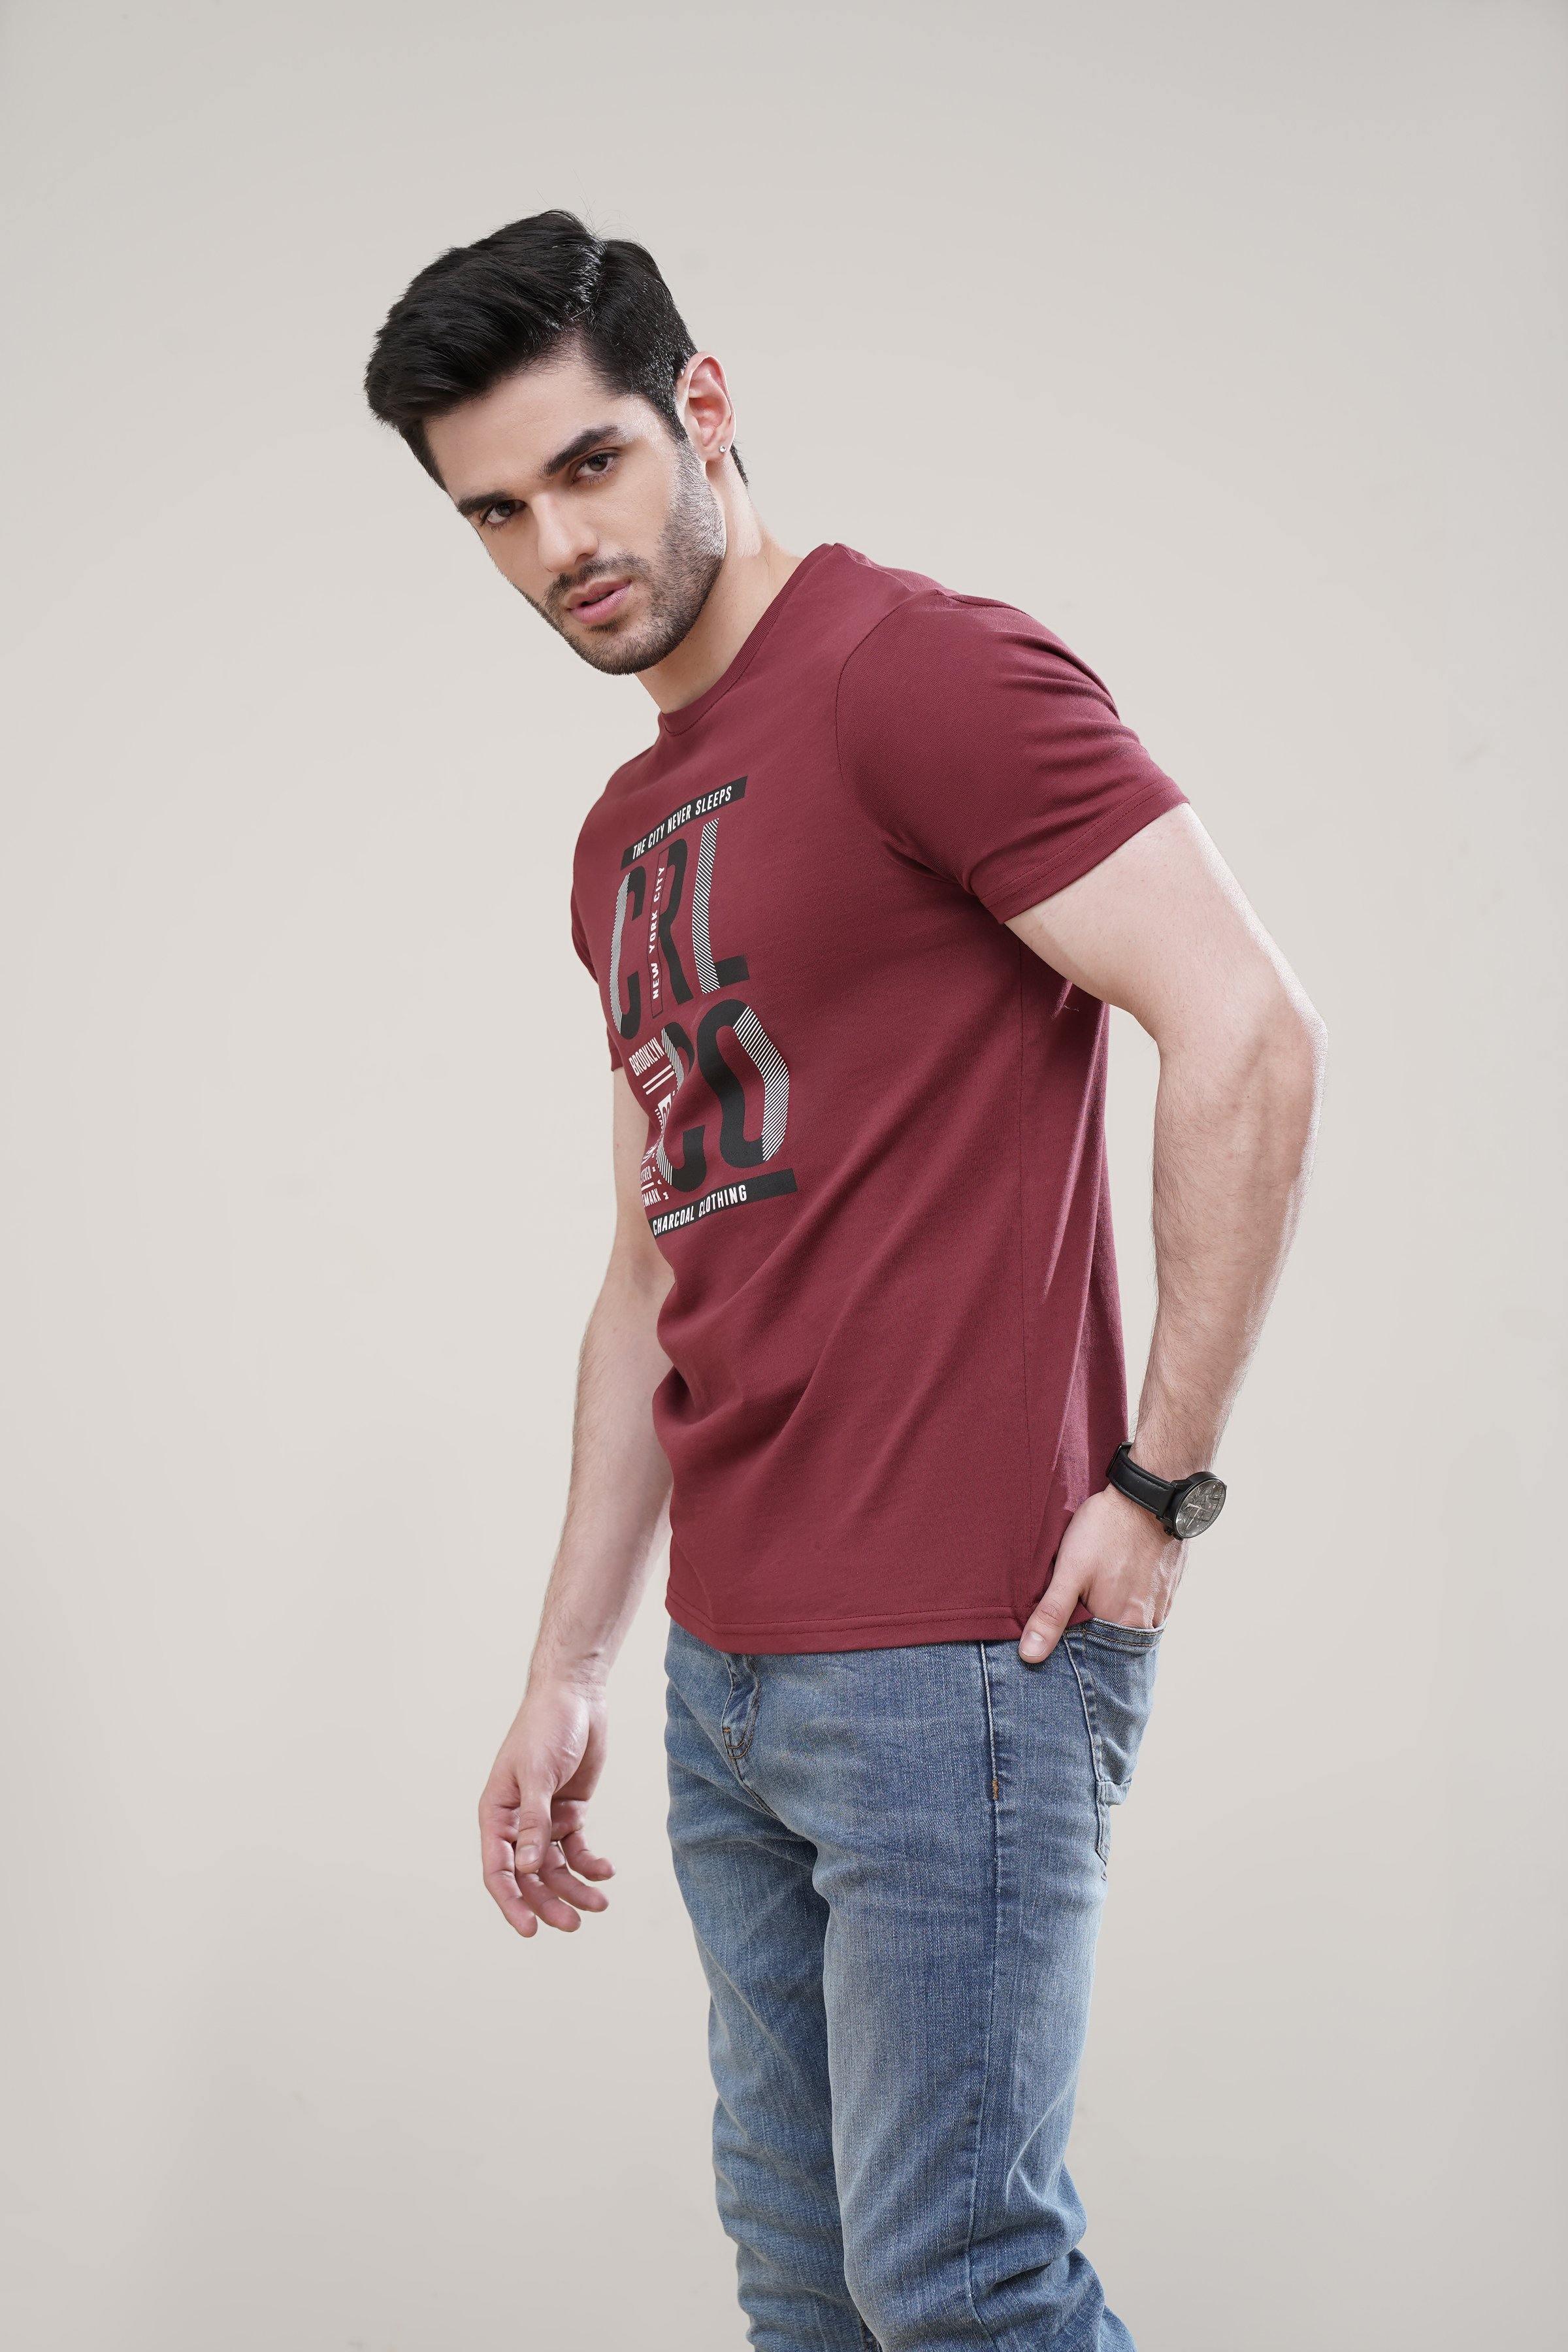 T SHIRT CREW NECK MAROON at Charcoal Clothing